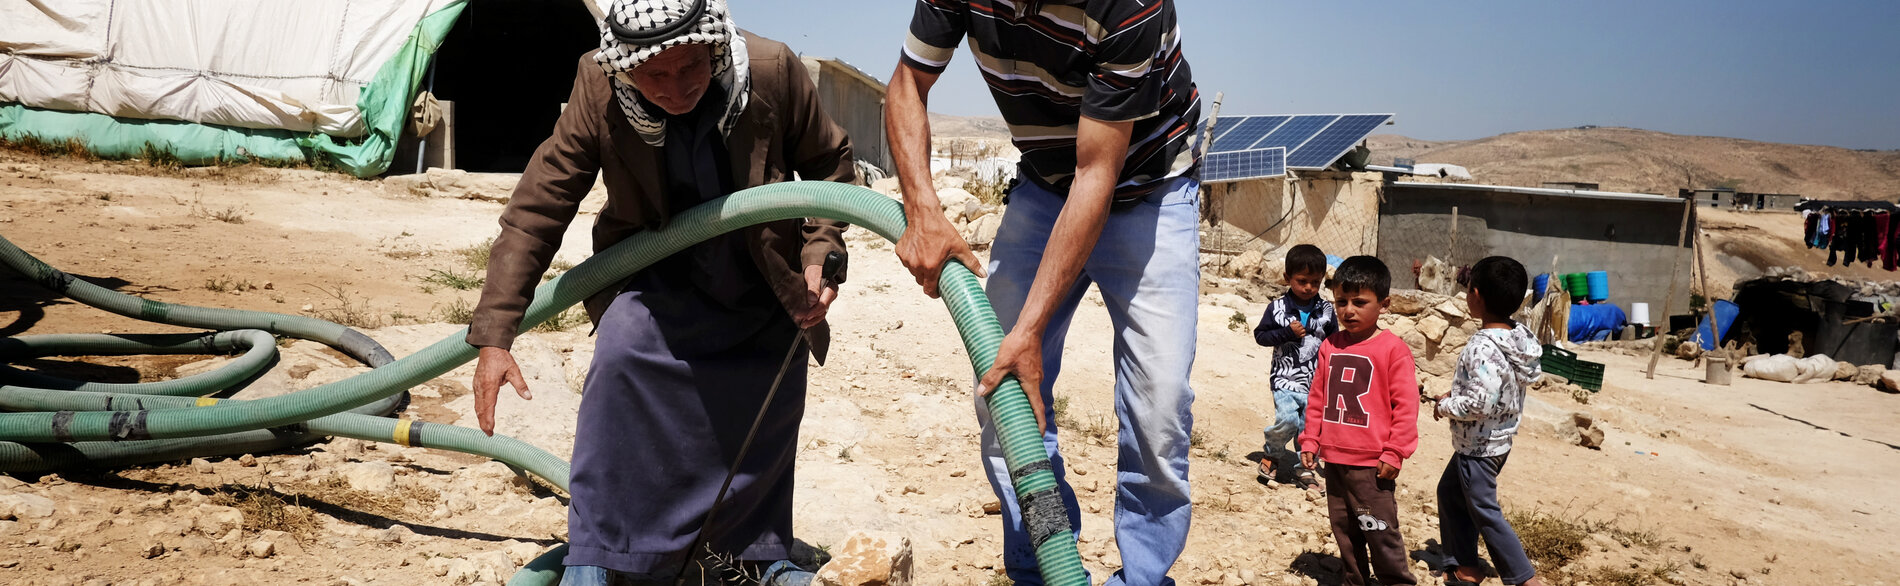 Palestinians in an Area C community of the West Bank not connected to the water grid. Archive picture by OCHA